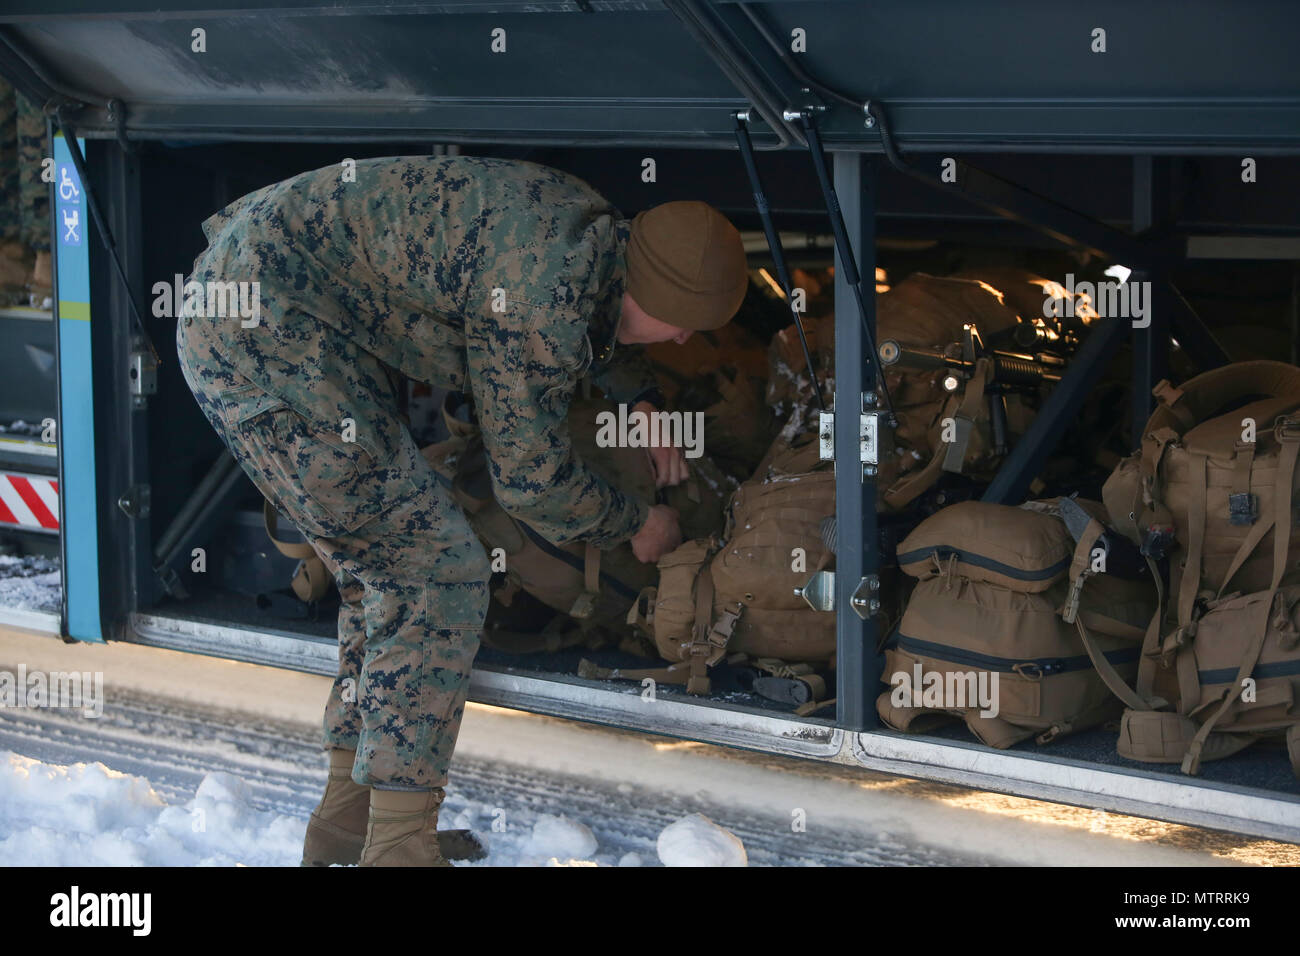 A U.S. Marine places his pack under the bus shortly after their plane landed at Vaernes Garnison, Norway, Jan. 16, 2017. The Marines with Black Sea Rotational Force arrived at Vaernes Garnison early in the morning as part of Marine Rotational Force Europe 17.1. (U.S. Marine Corps photo by Lance Cpl. Victoria Ross) Stock Photo